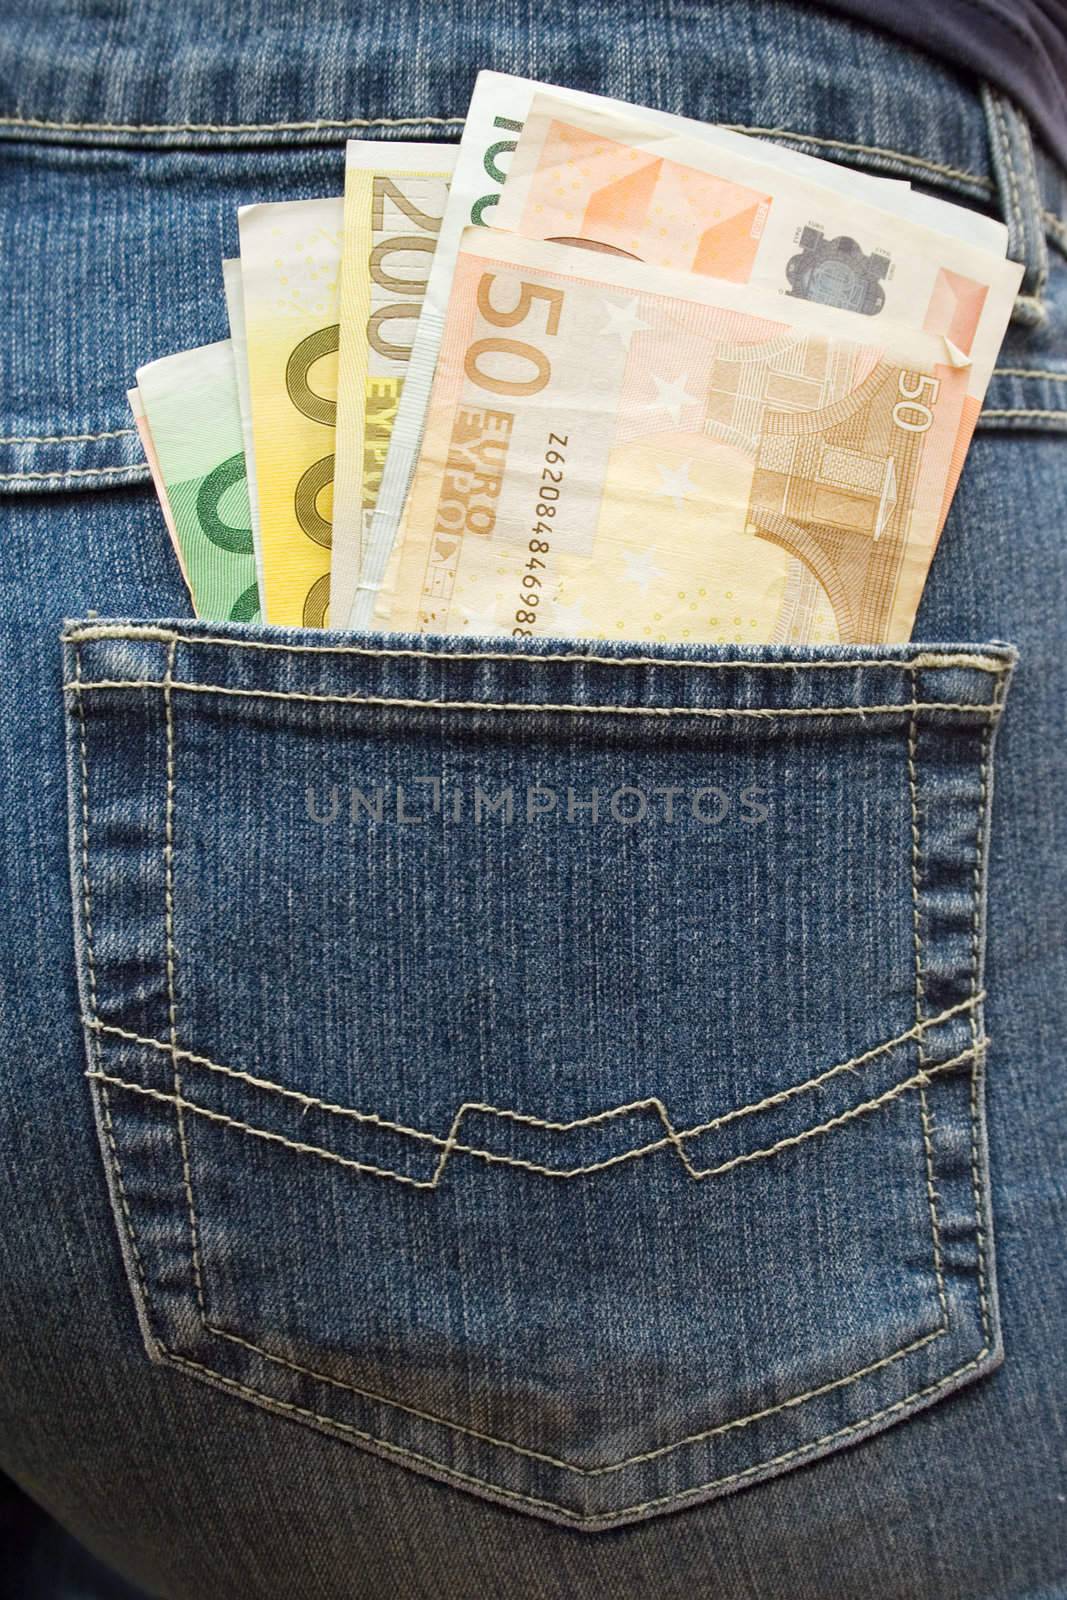 Bunch of Euro banknotes in a jeans pocket.